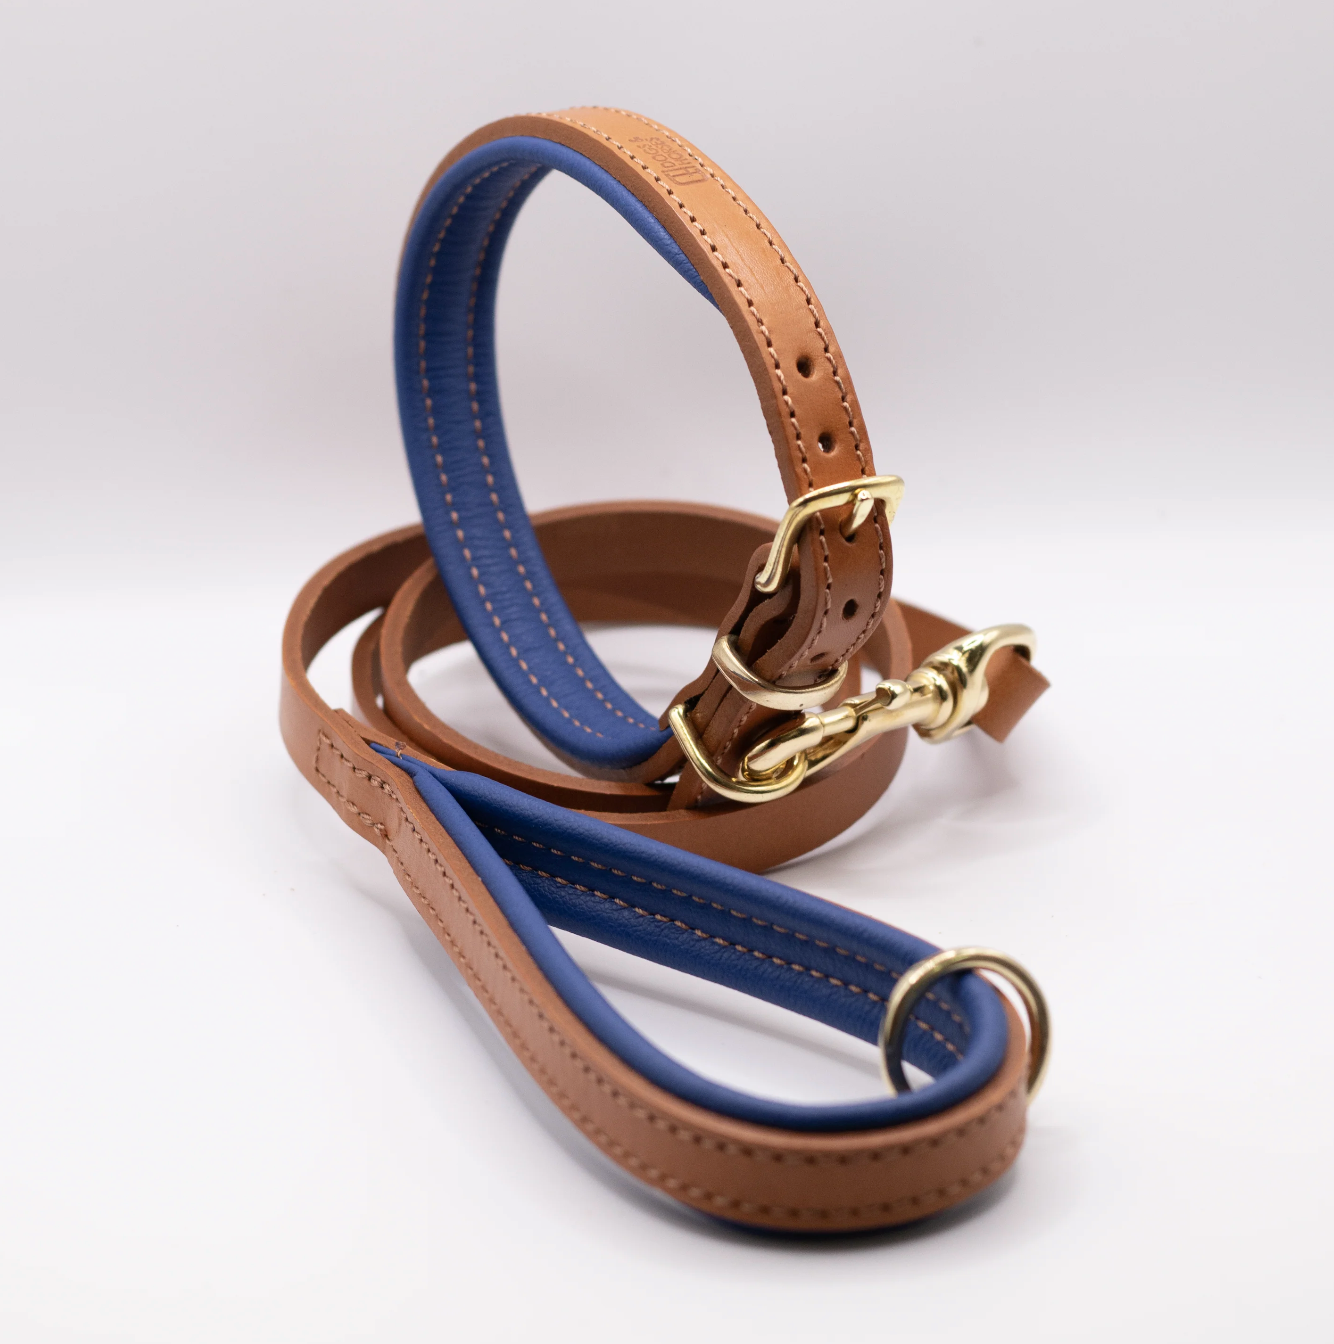 Padded Leather Dog Collar Tan and Electric Blue